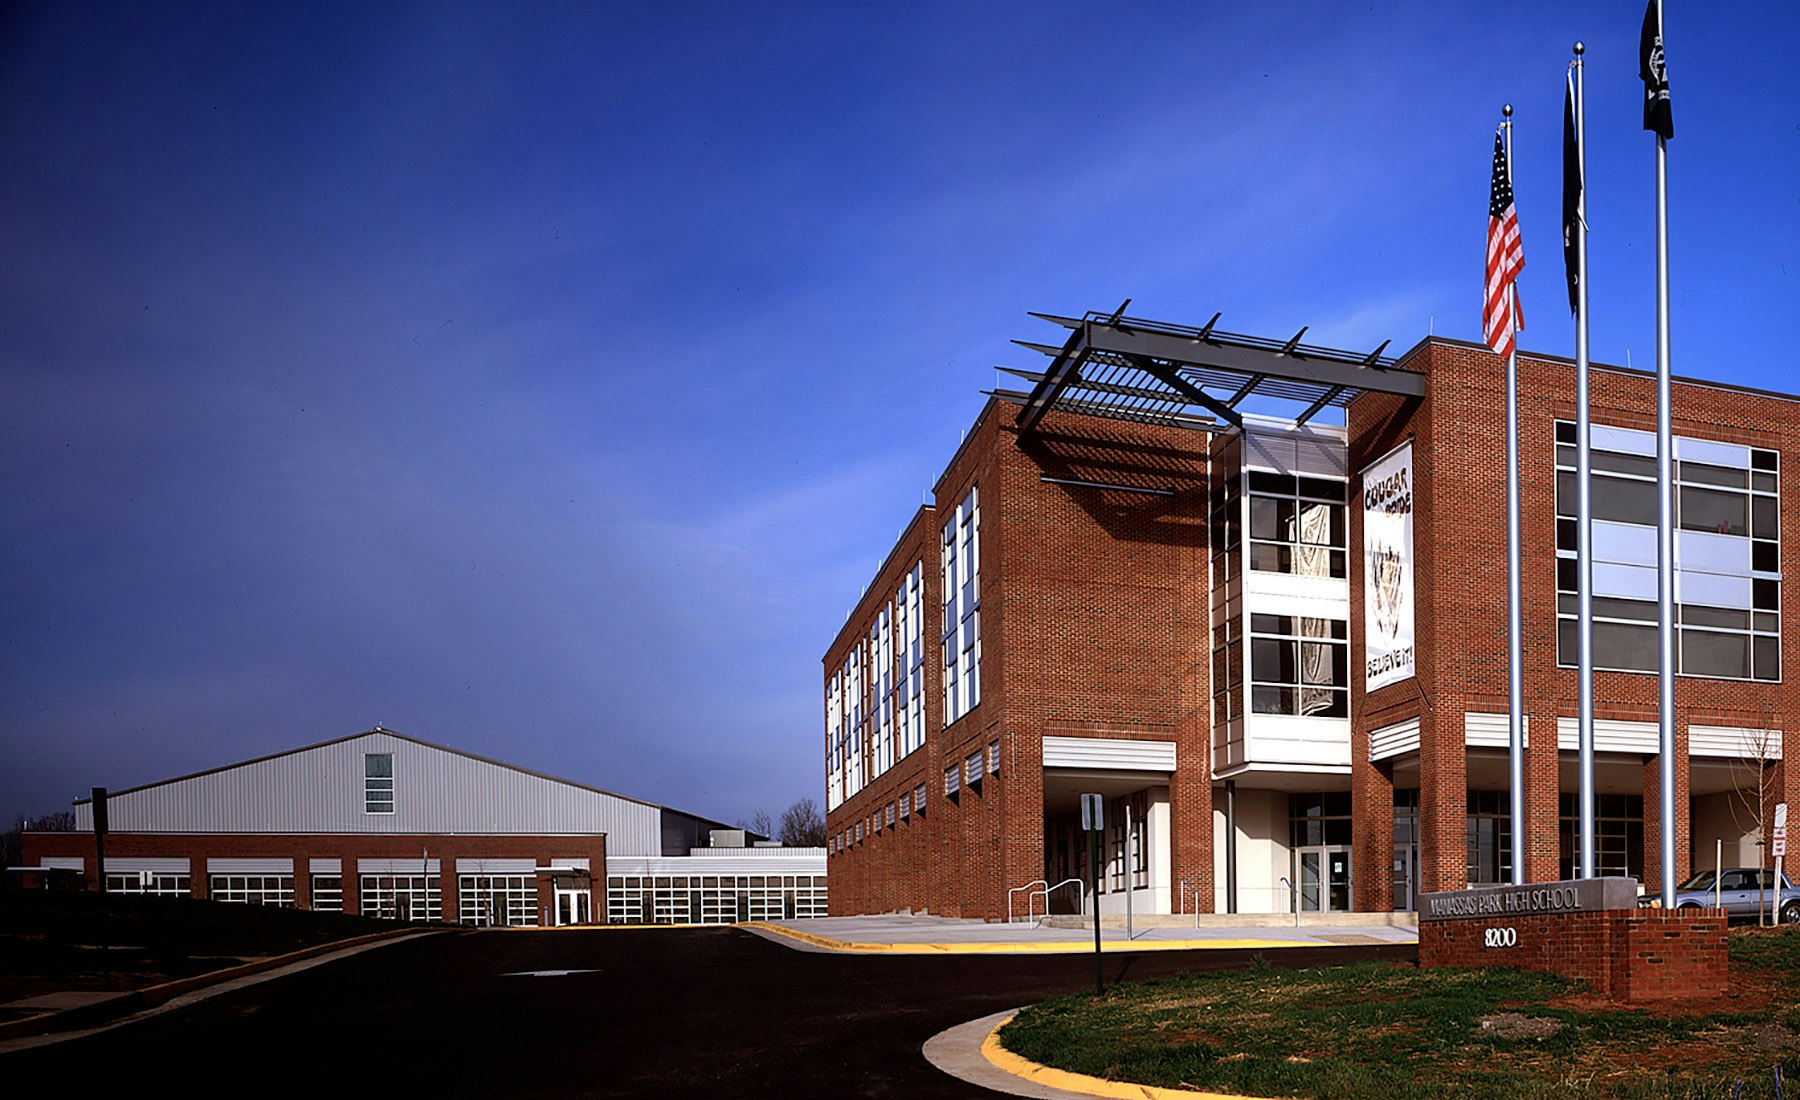 Manassas Park High School represents a comprehensive reinvention of local public education. The school supplements the middle school—to create an academic campus that serves as a civic focal point. 